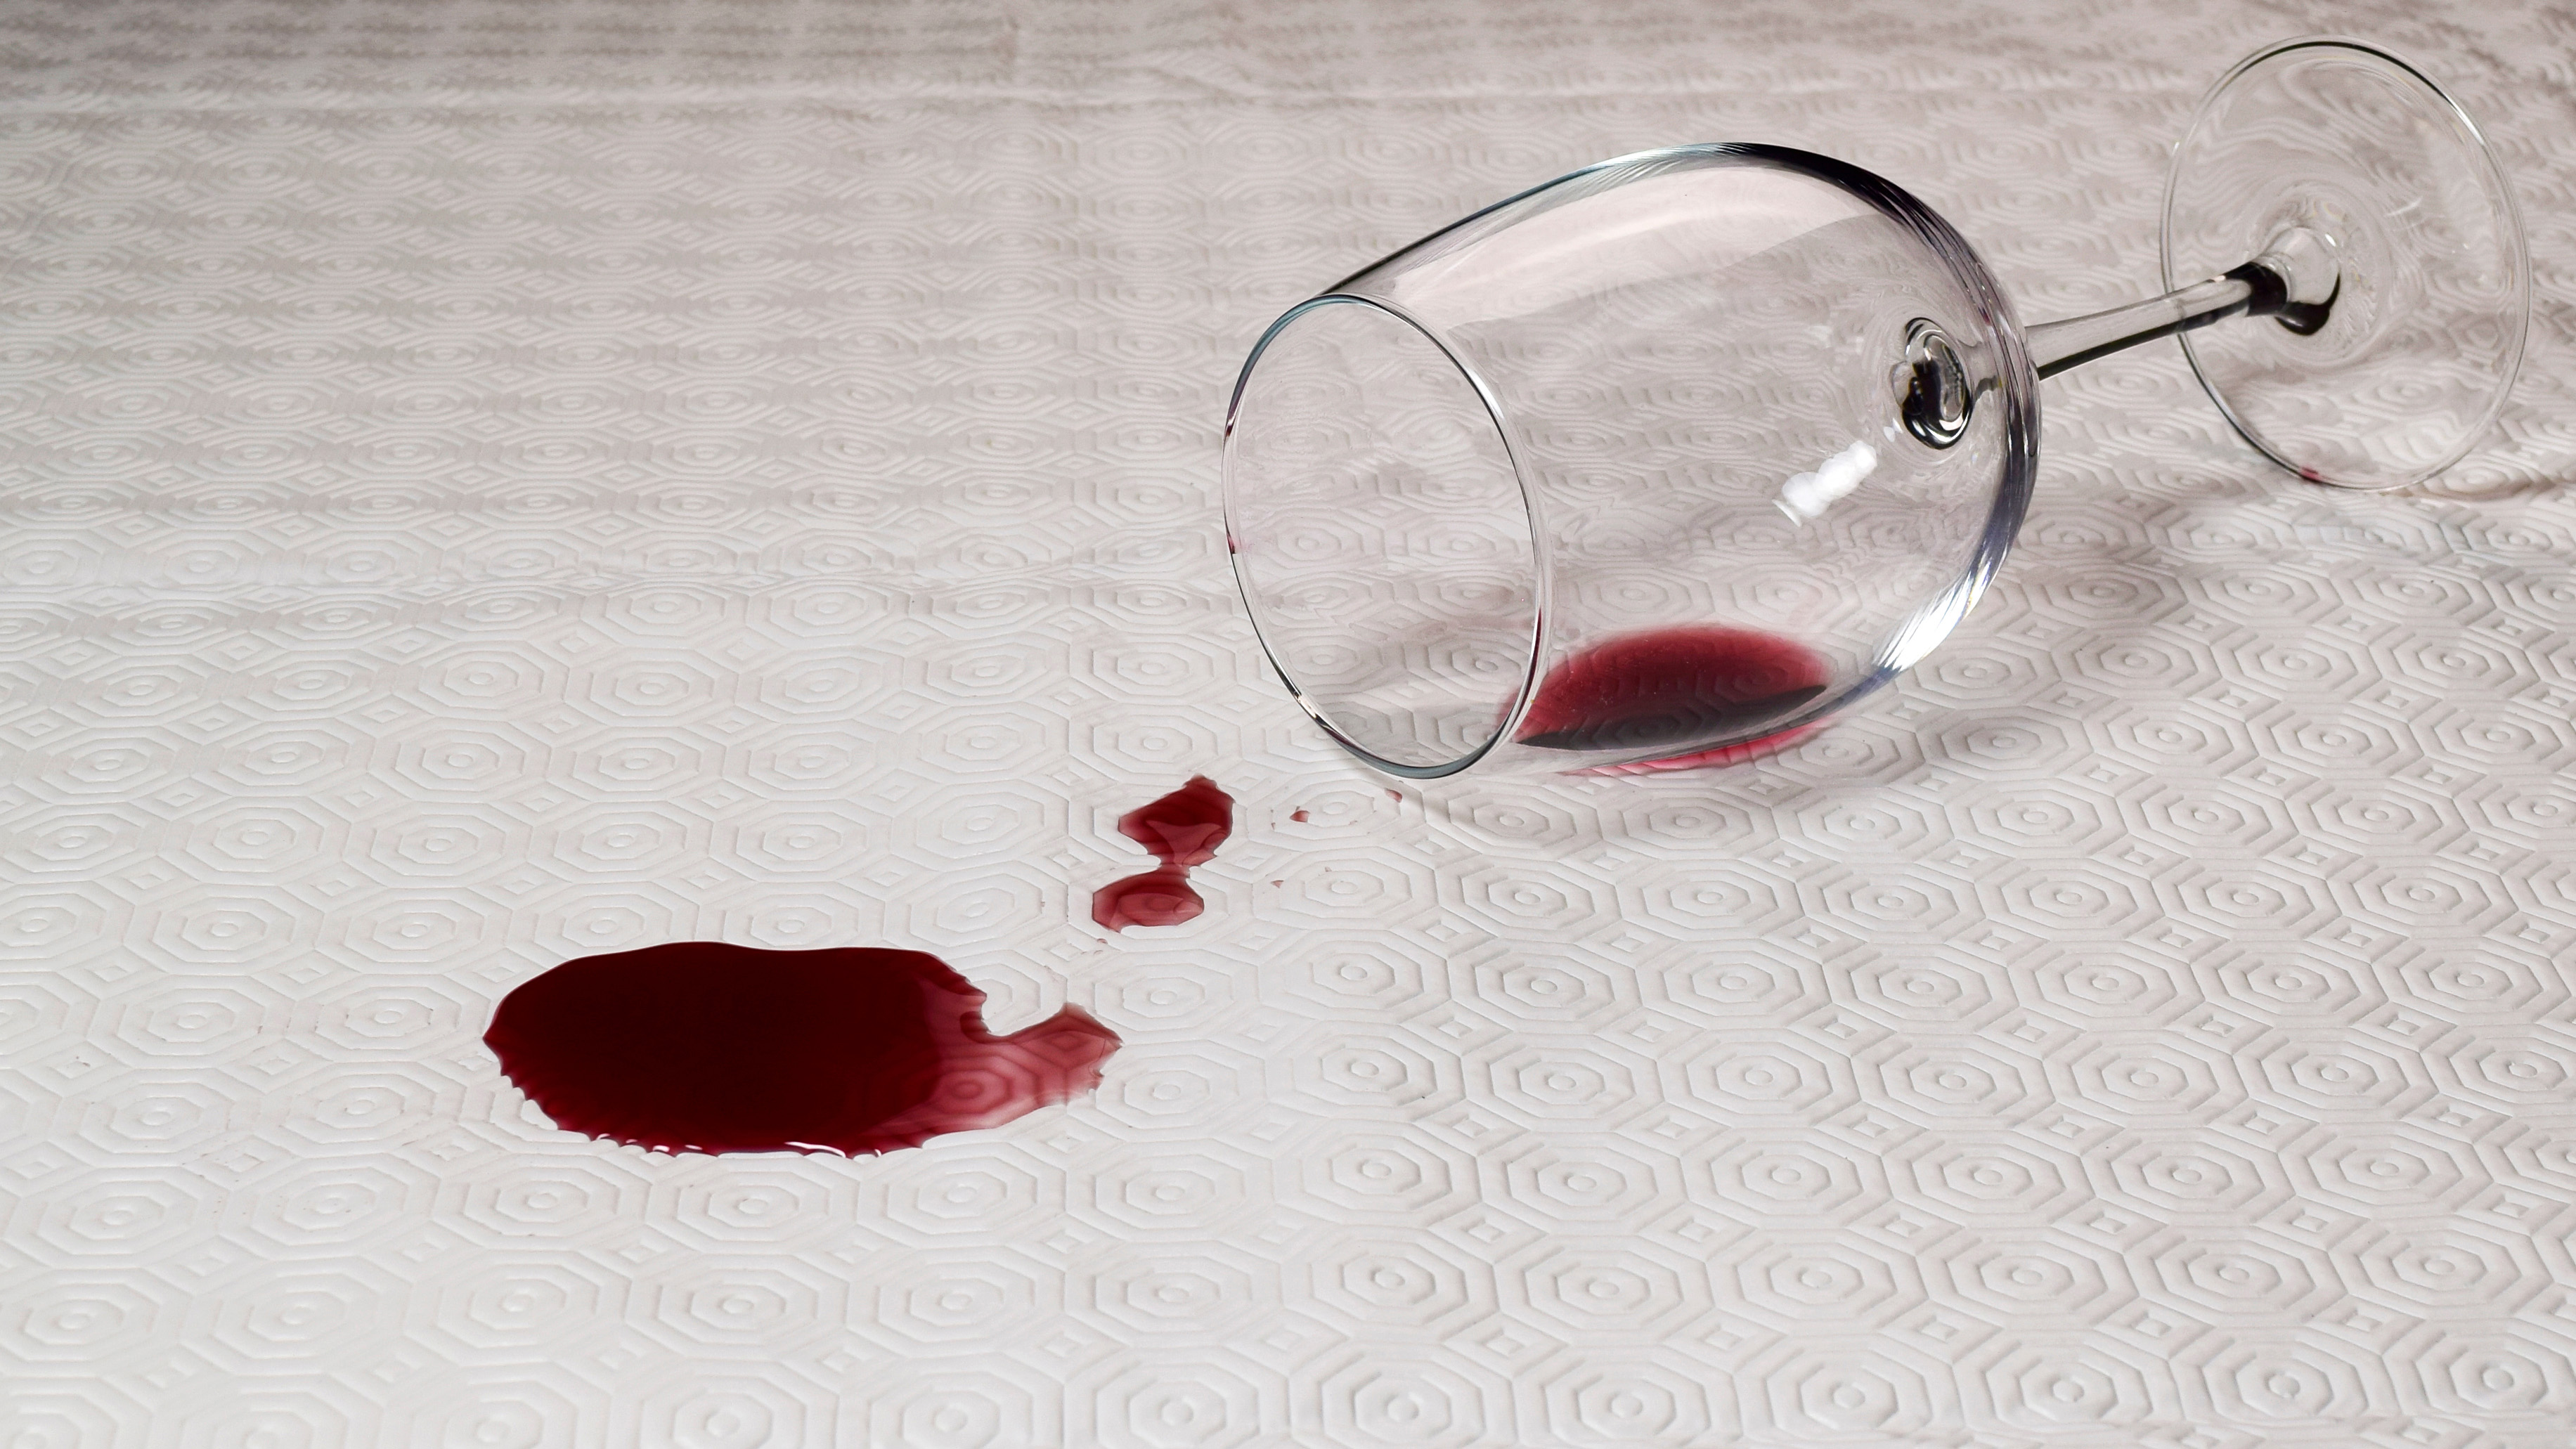 A glass of spilled red wine